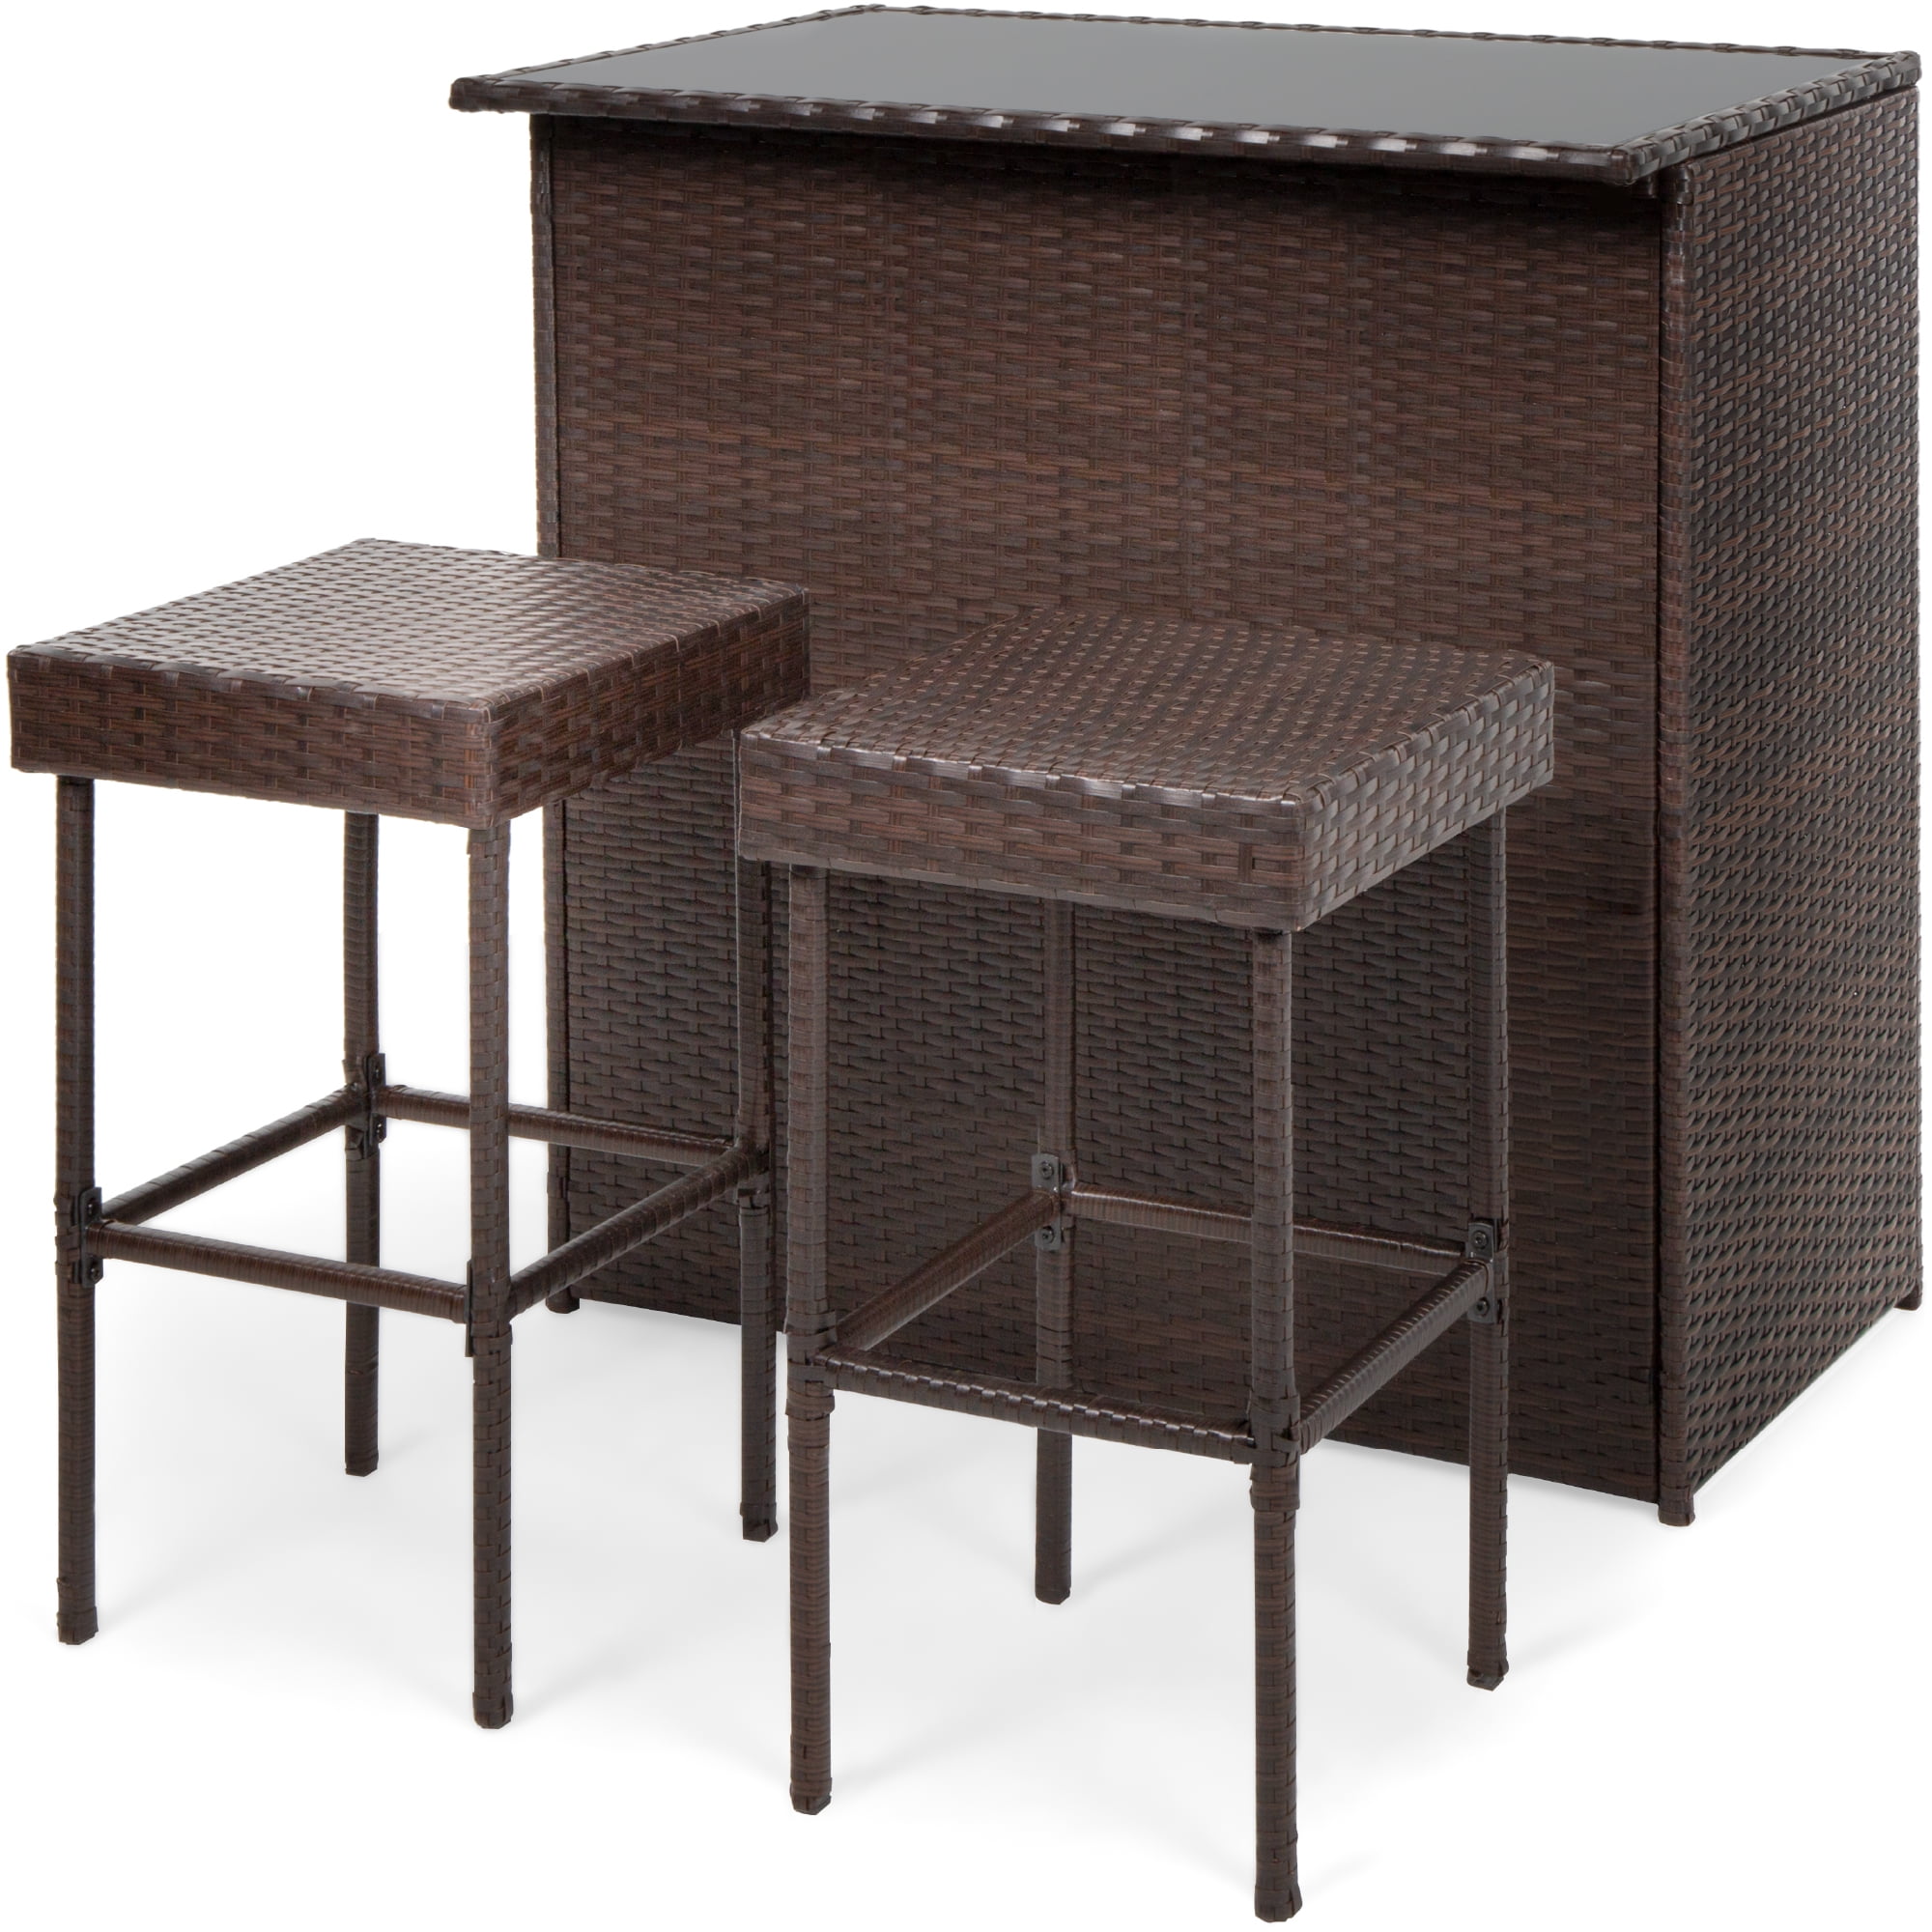 Weather Wicker Bar Table Set, Outdoor Wicker Bar Table Furniture